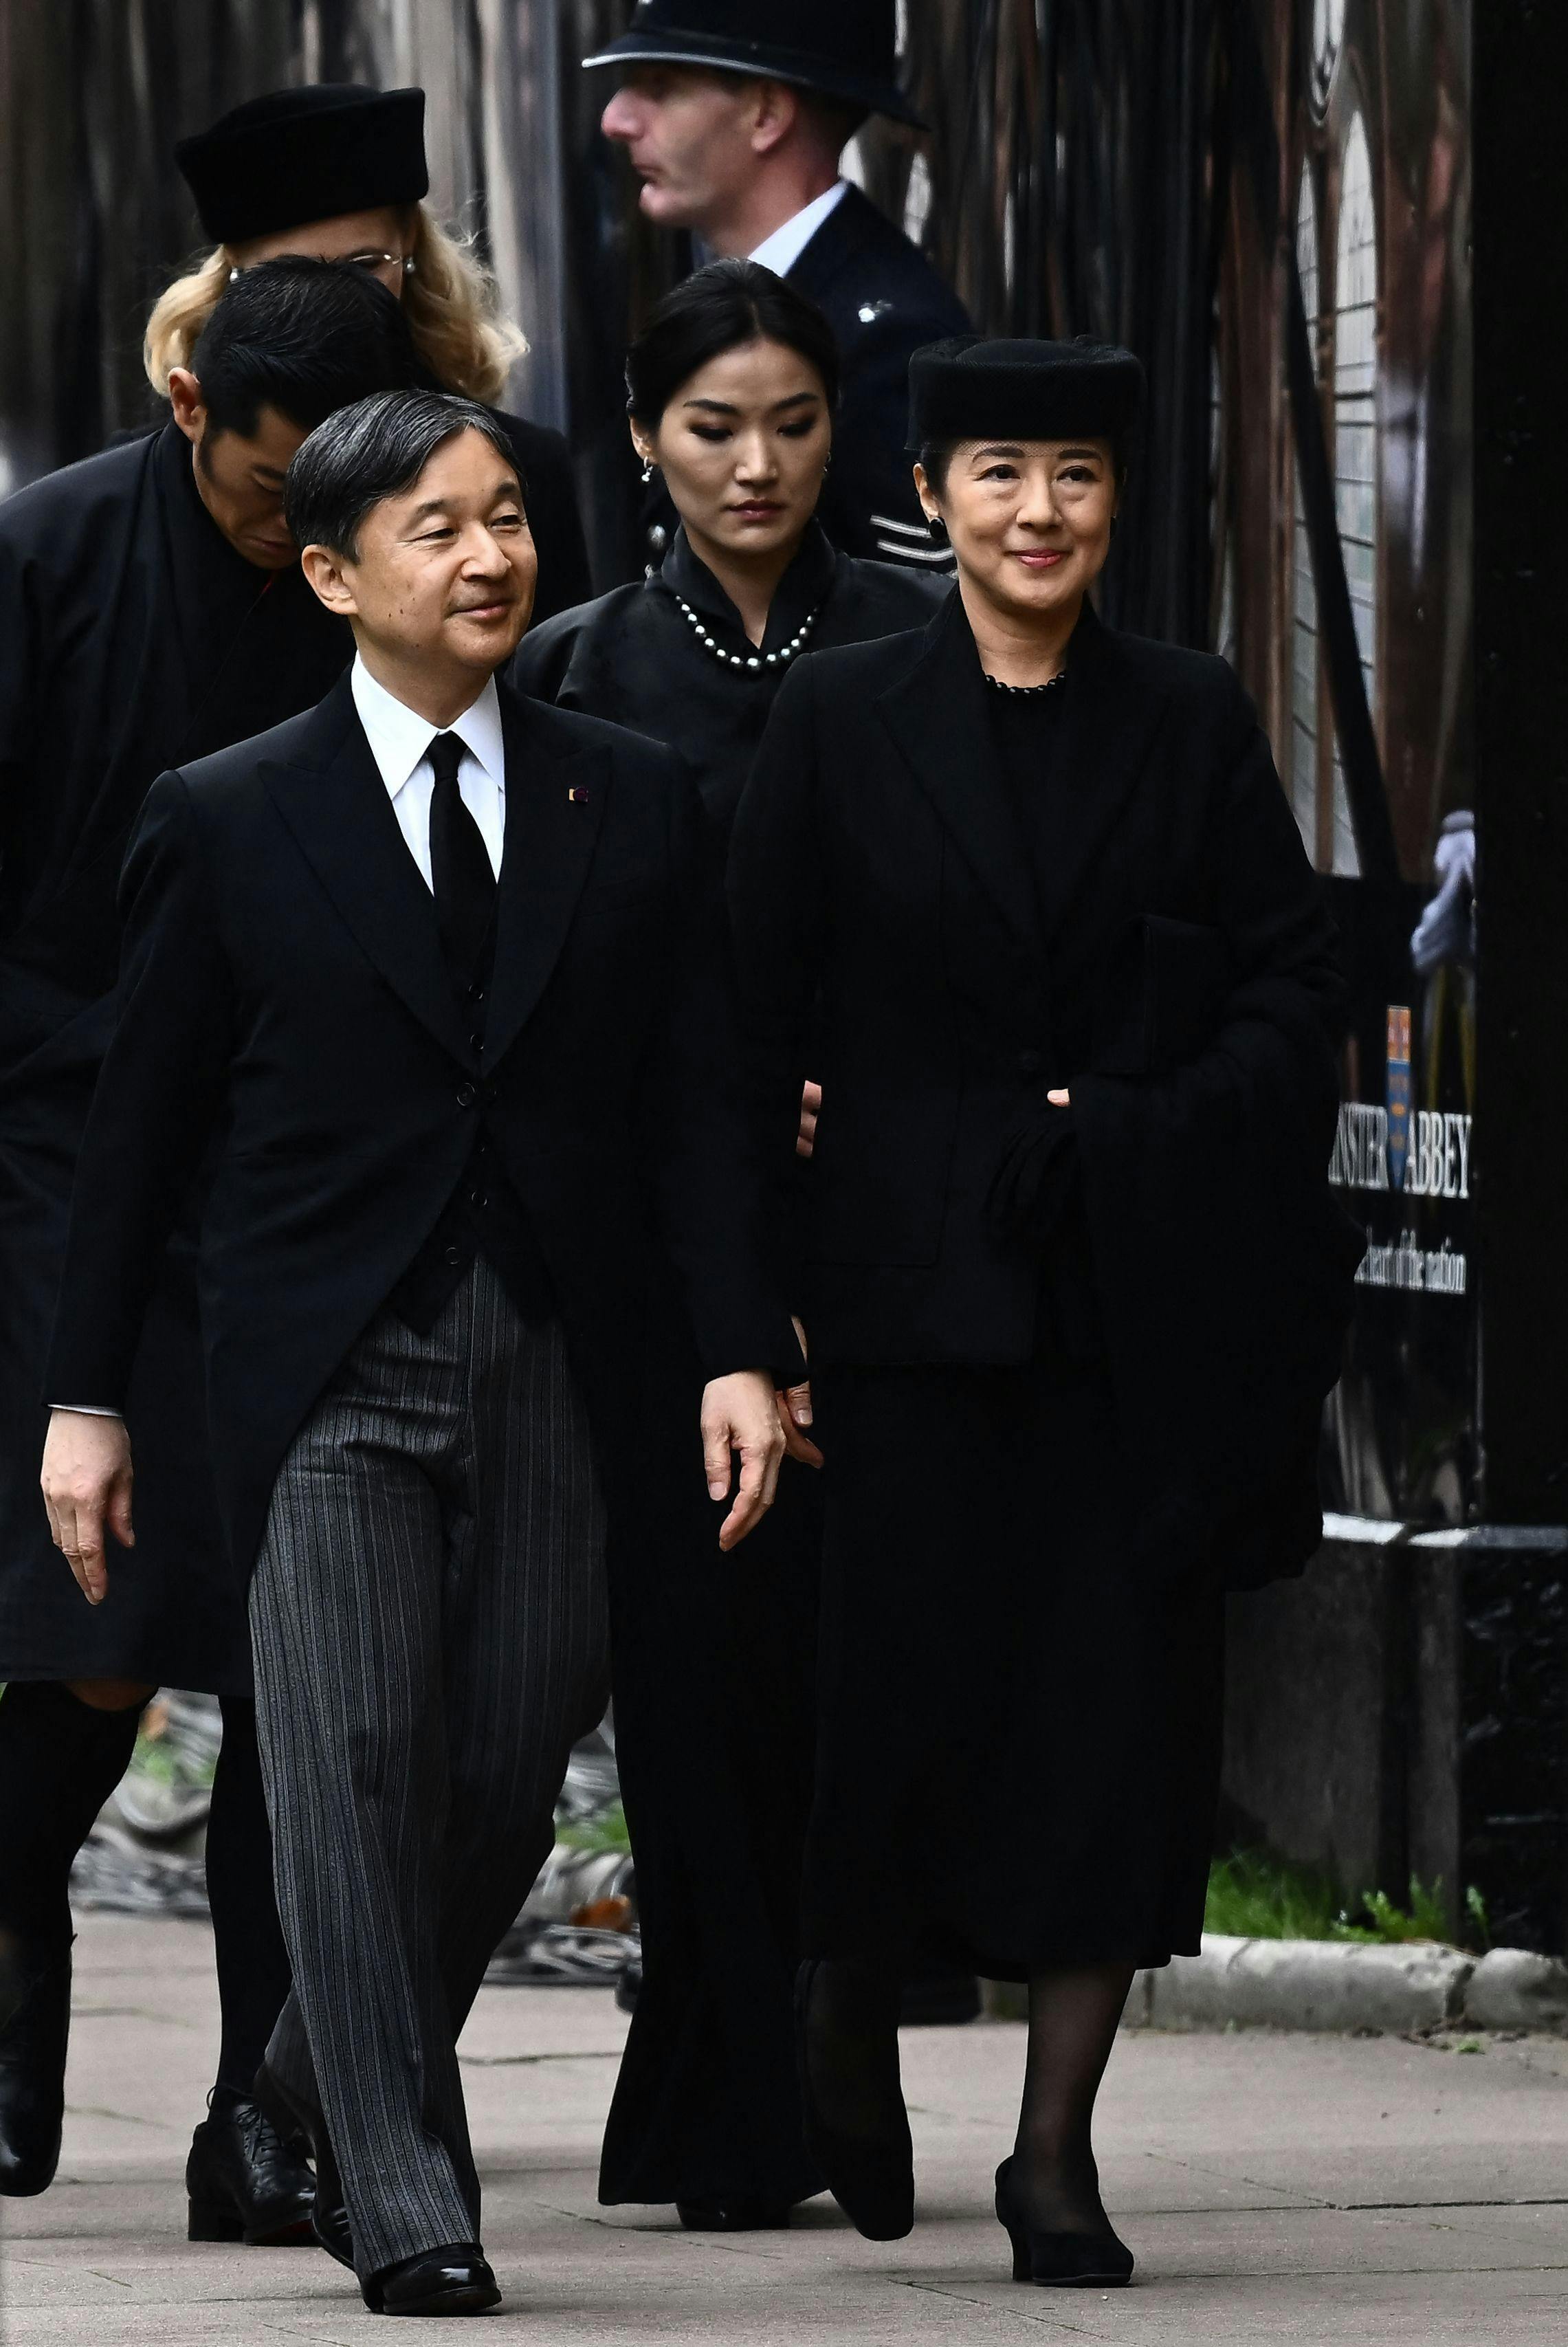 Japan's Emperor Naruhito and Japan's Empress Masako arrive to take their seats inside Westminster Abbey in London on September 19, 2022, for the State Funeral Service for Britain's Queen Elizabeth II. - Leaders from around the world will attend the state funeral of Queen Elizabeth II. The country's longest-serving monarch, who died aged 96 after 70 years on the throne, will be honoured with a state funeral on Monday morning at Westminster Abbey. (Photo by Marco BERTORELLO / AFP)